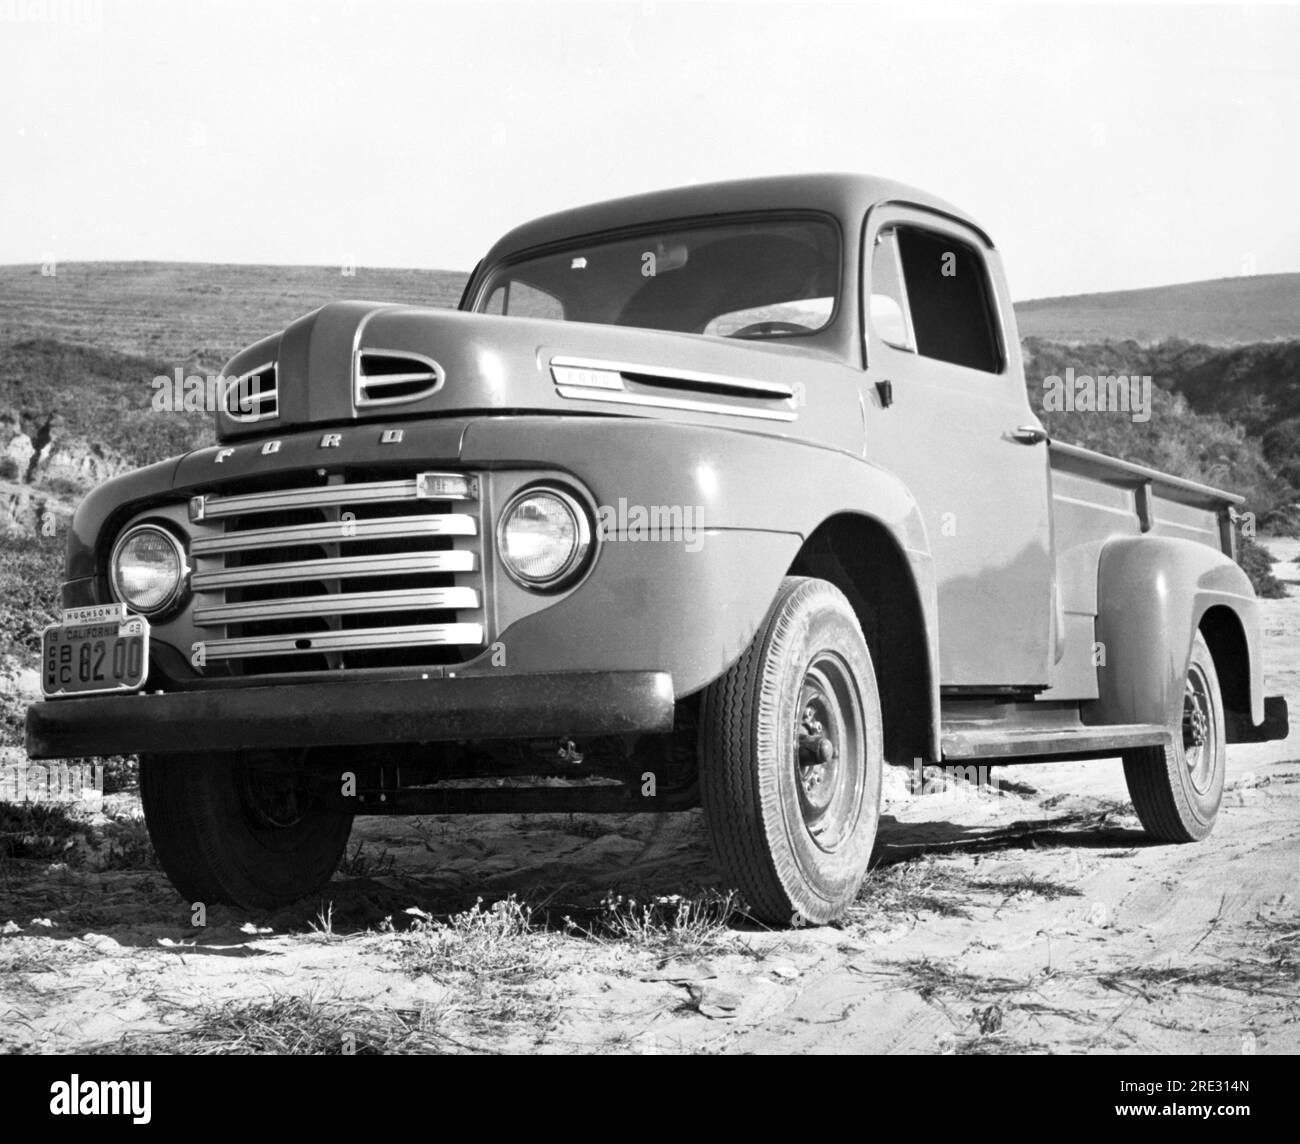 California:  1948 A Ford pickup truck parked in the country. Stock Photo